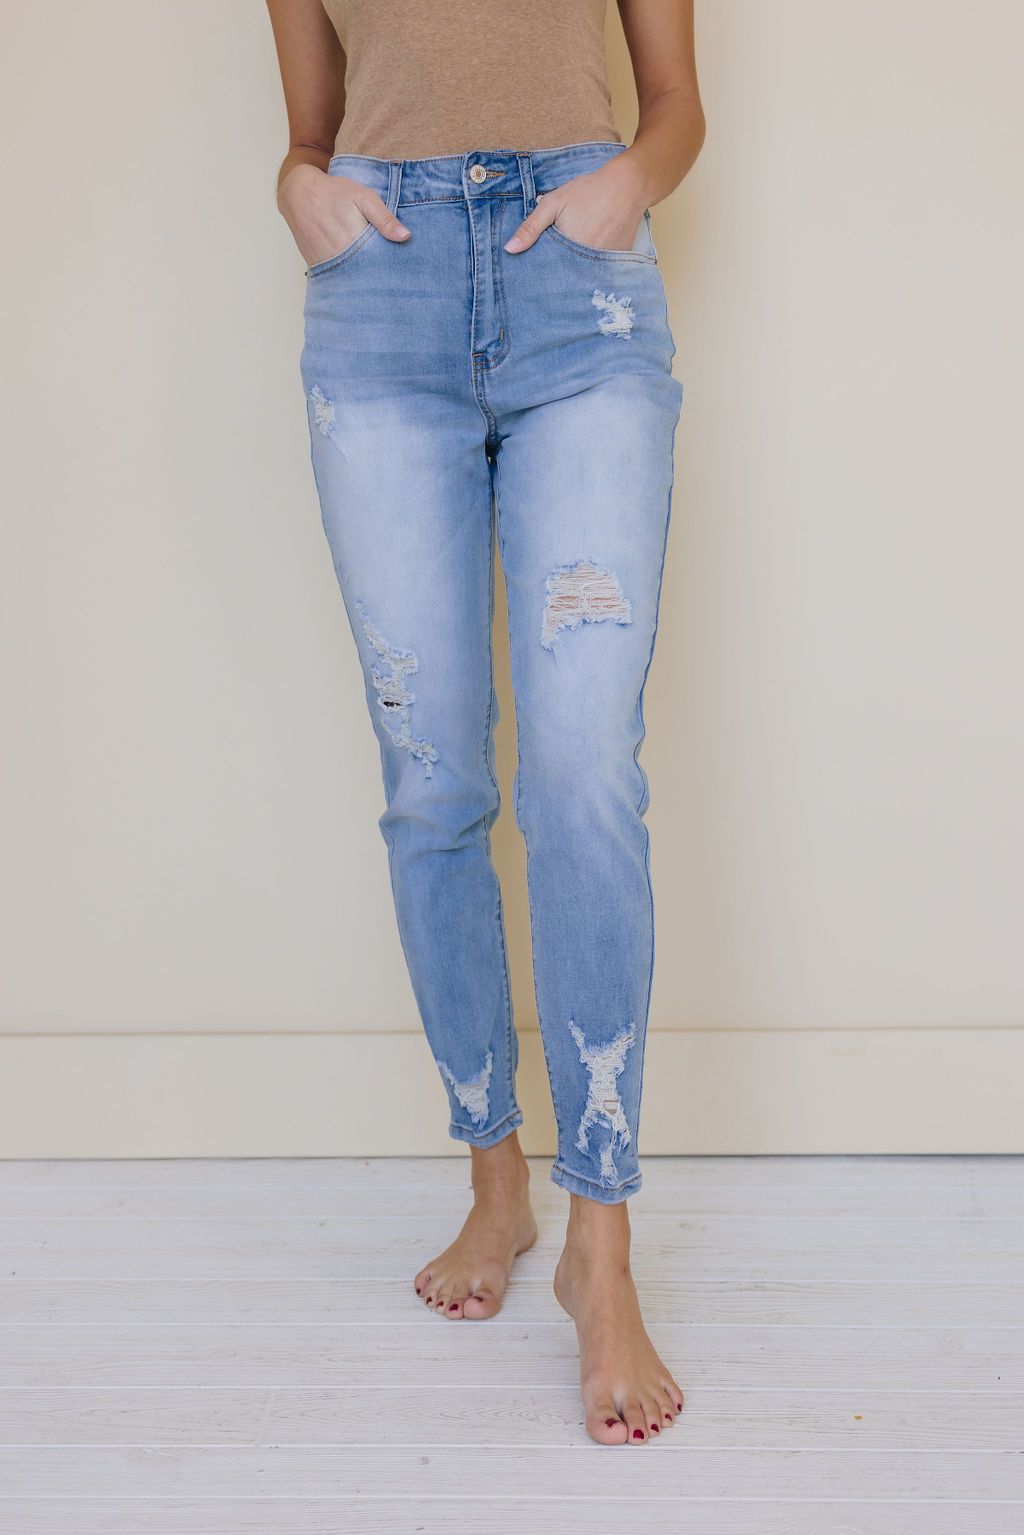 Feel Love Distressed Jeans